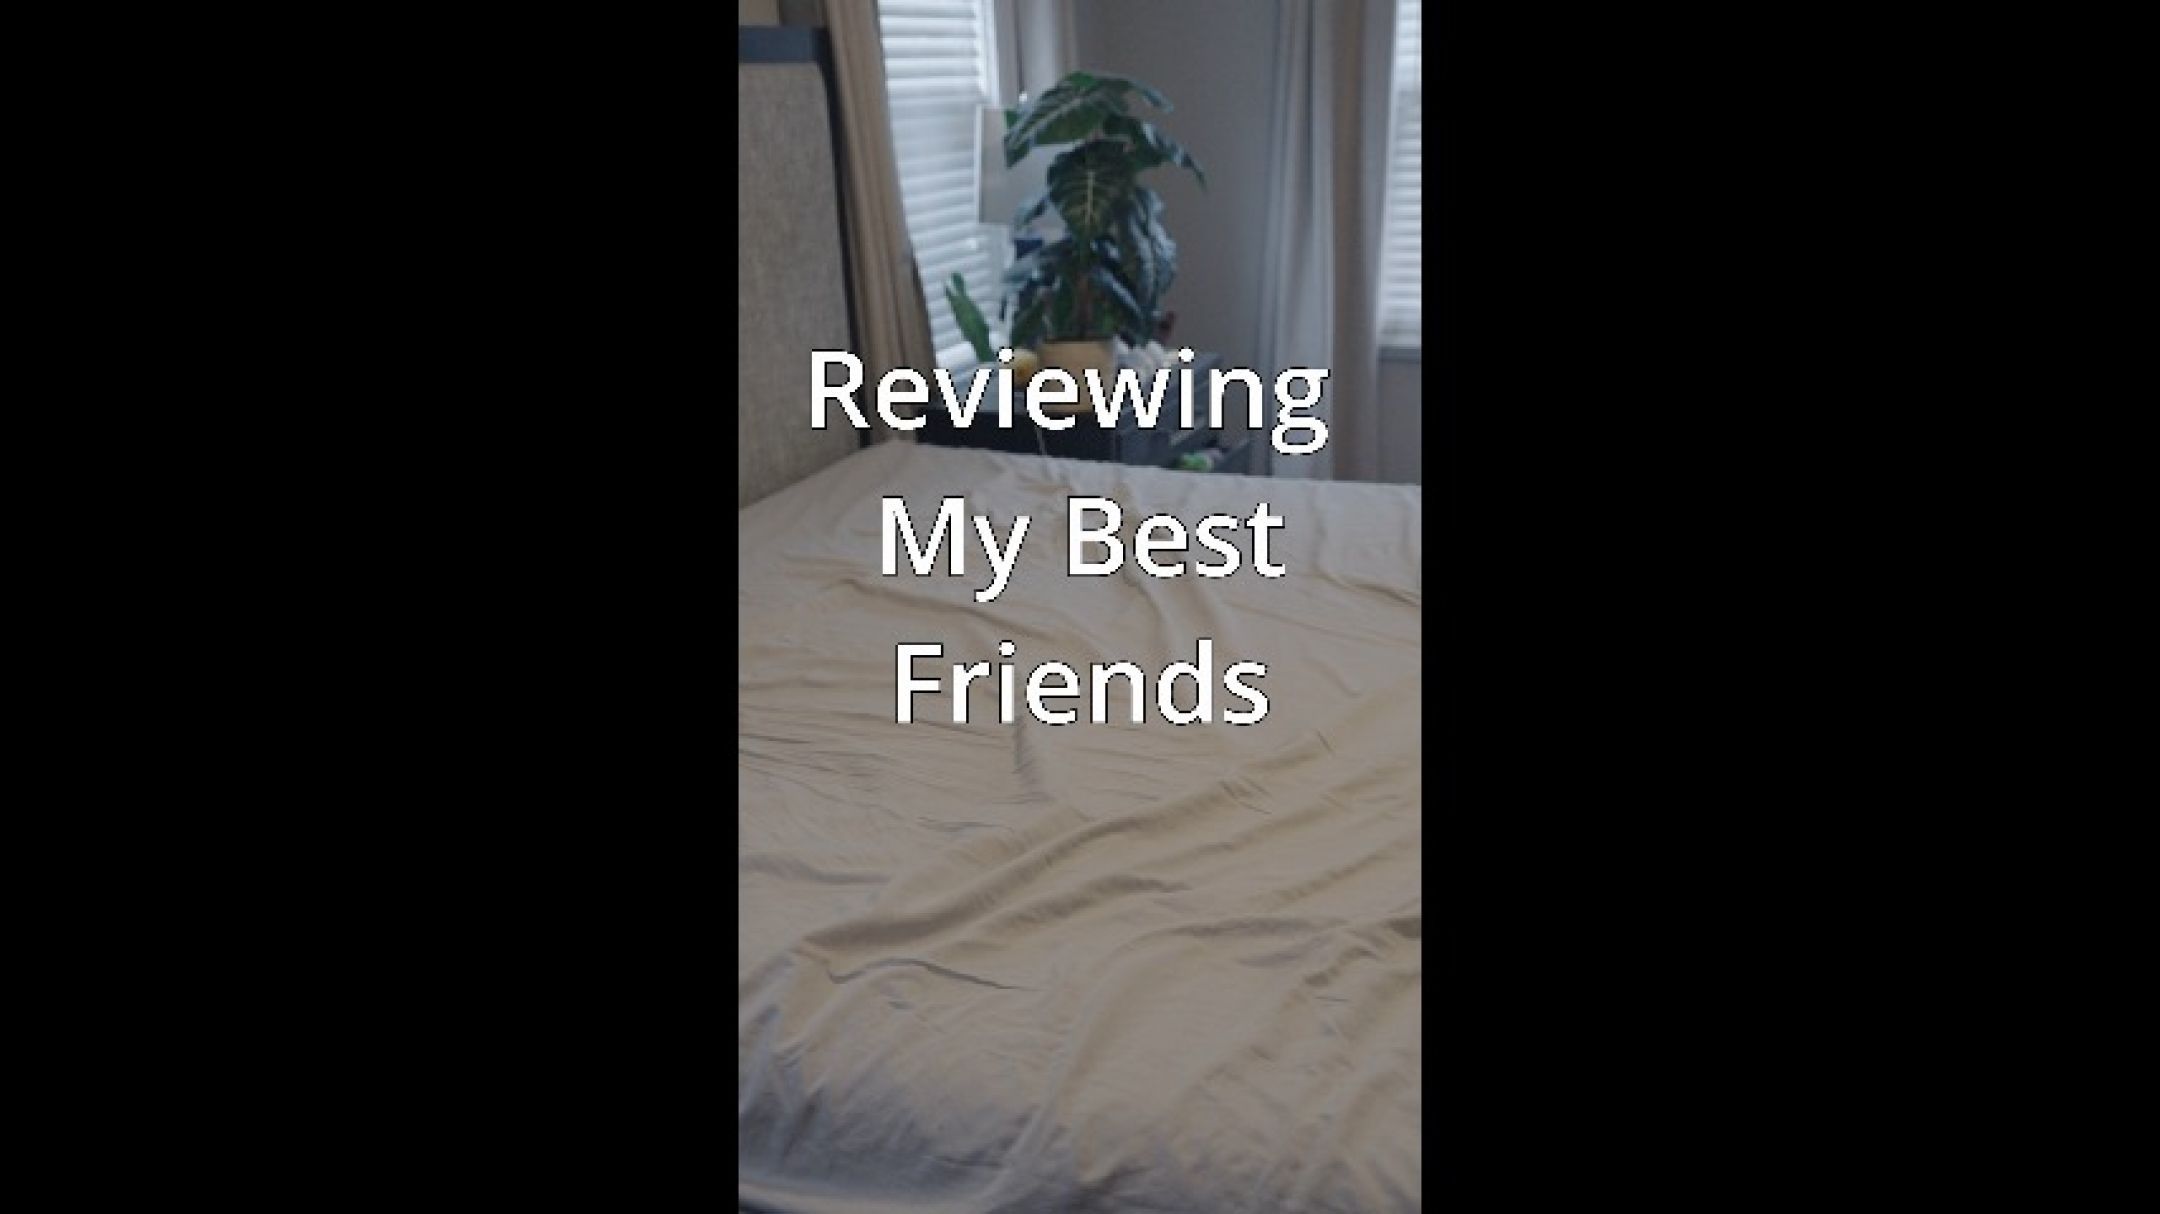 My room mate review every inch of me